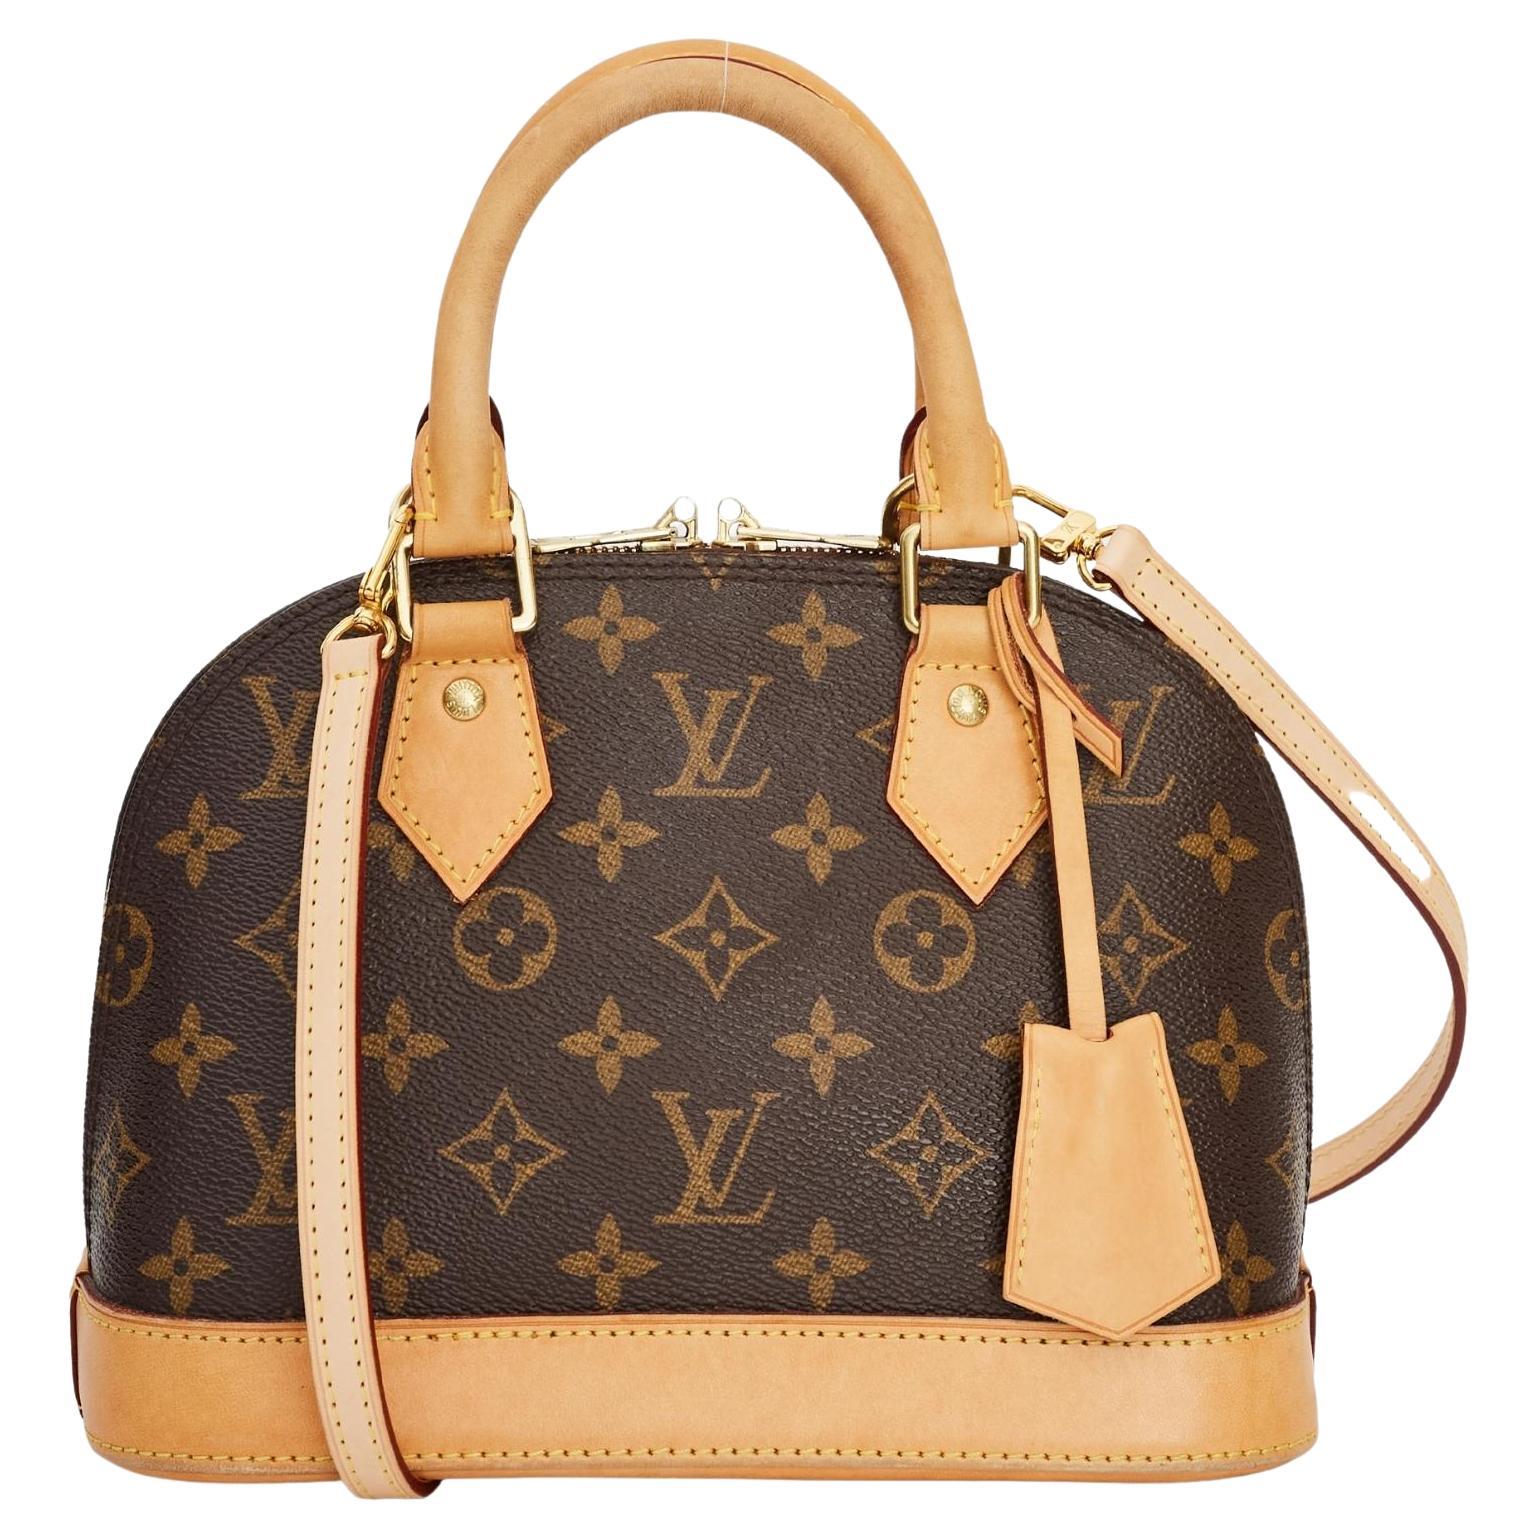 Vintage Louis Vuitton: Bags, Clothing & More - 11,528 For Sale at 